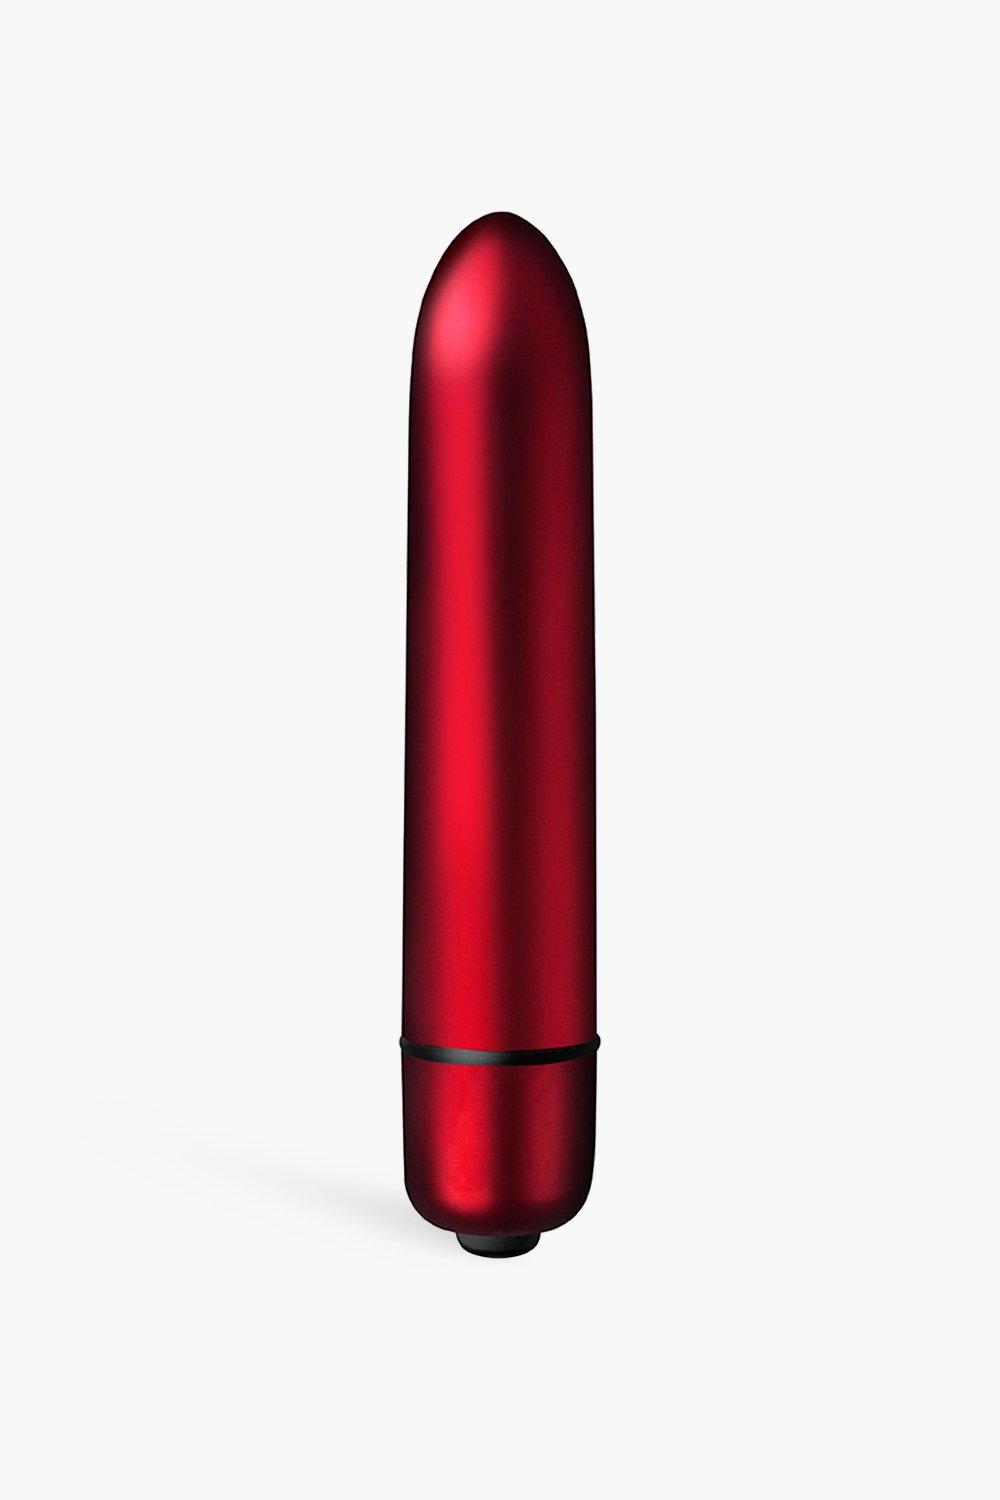 Image of Vibratore Touch Of Velvet, Rosso